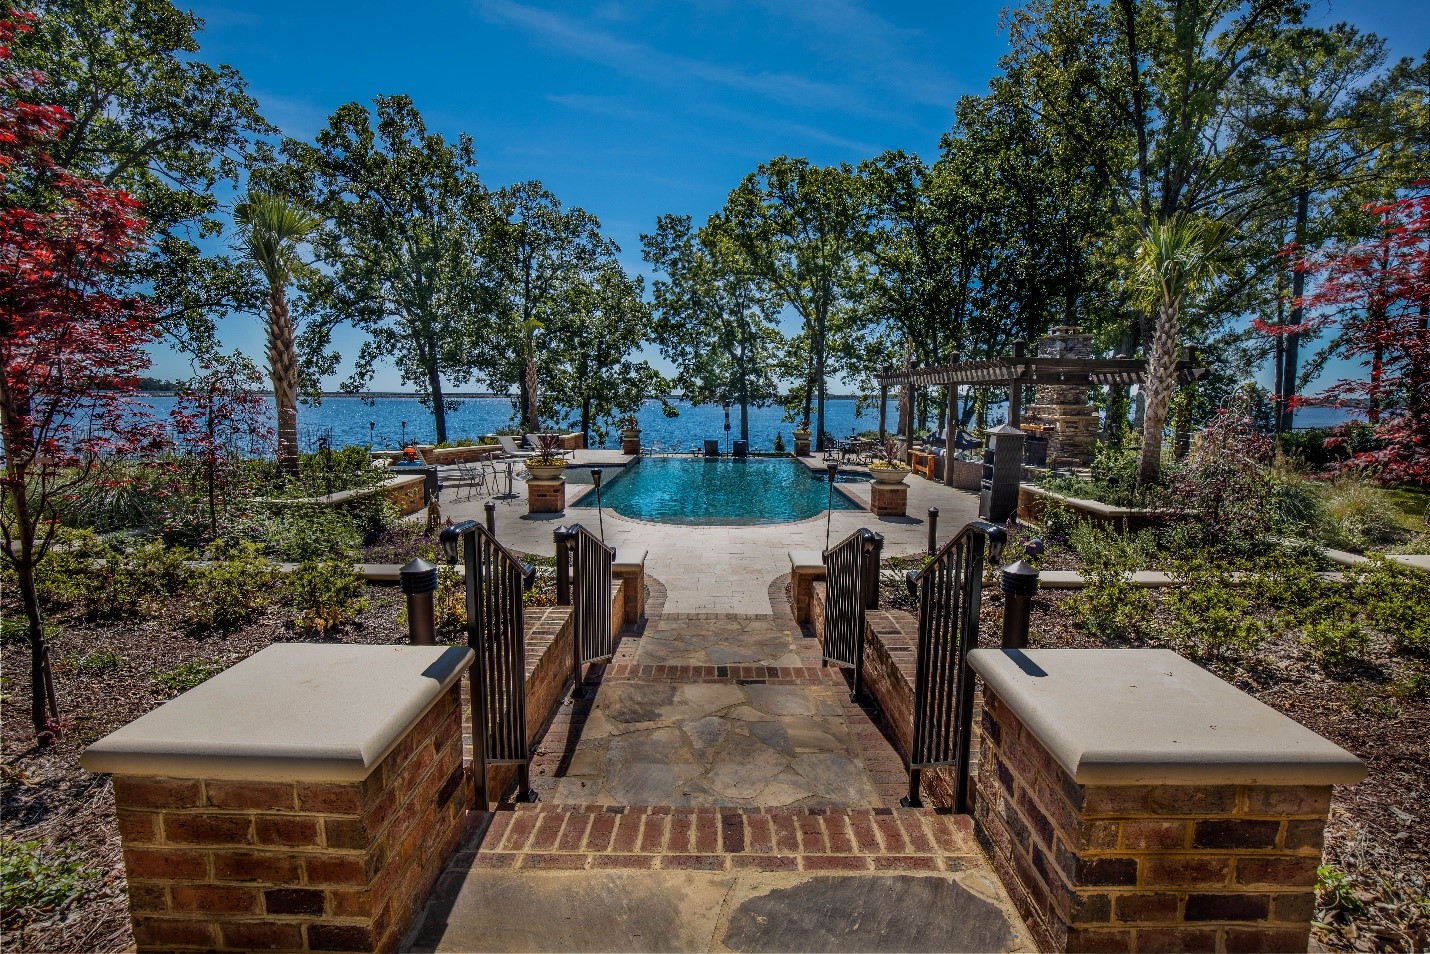 Pool Designs, Custom Pool, Inground Pools, Spas, Swimming Pools, The Clearwater Company, Columbia, SC